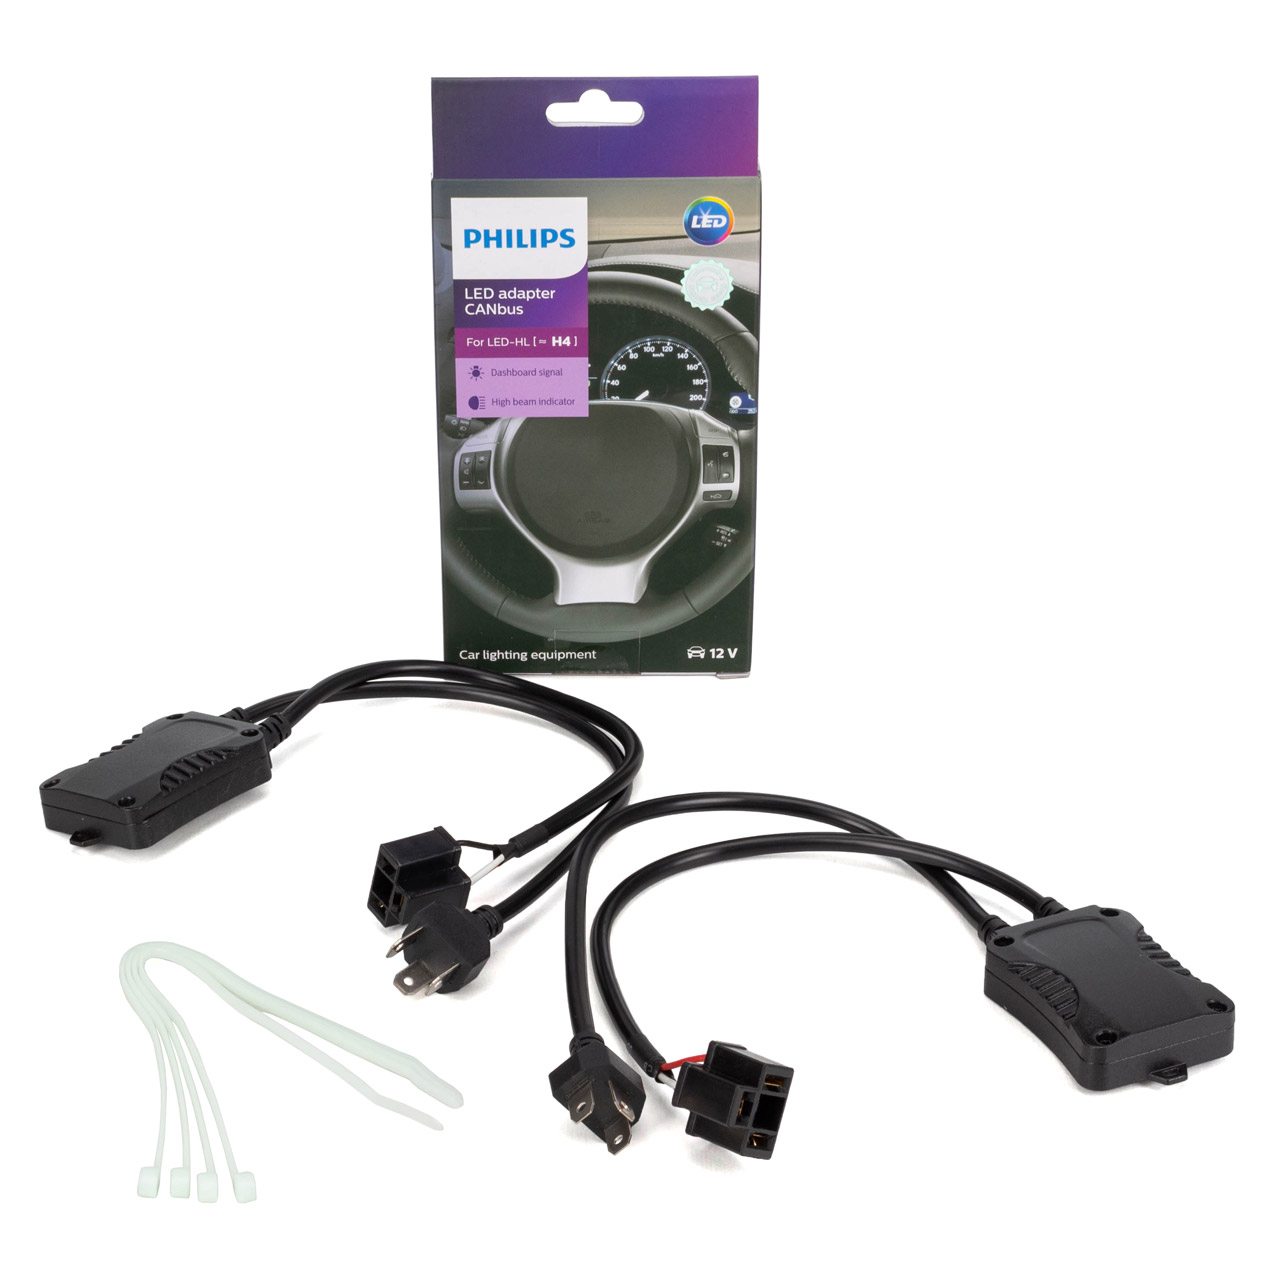 Philips CANbus Adapter Kit - High Performance Lighting